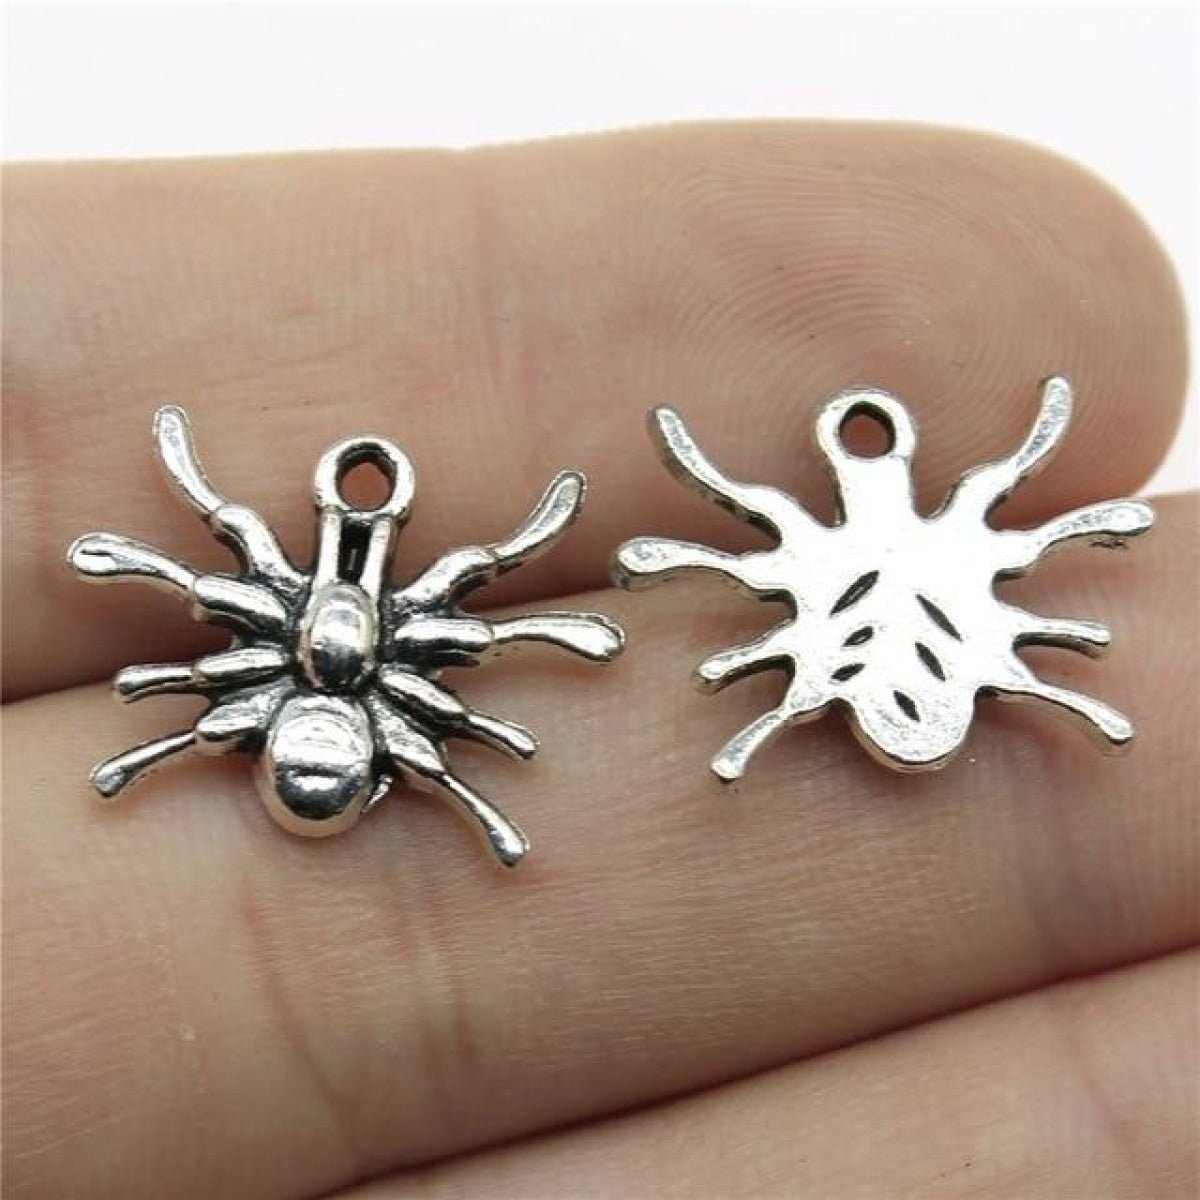 4pcs Spider Charms Antique Silver Colour Spider Charms Pendants For Bracelets Spider Cobweb Charms Making Jewellery - A - - Asia Sell